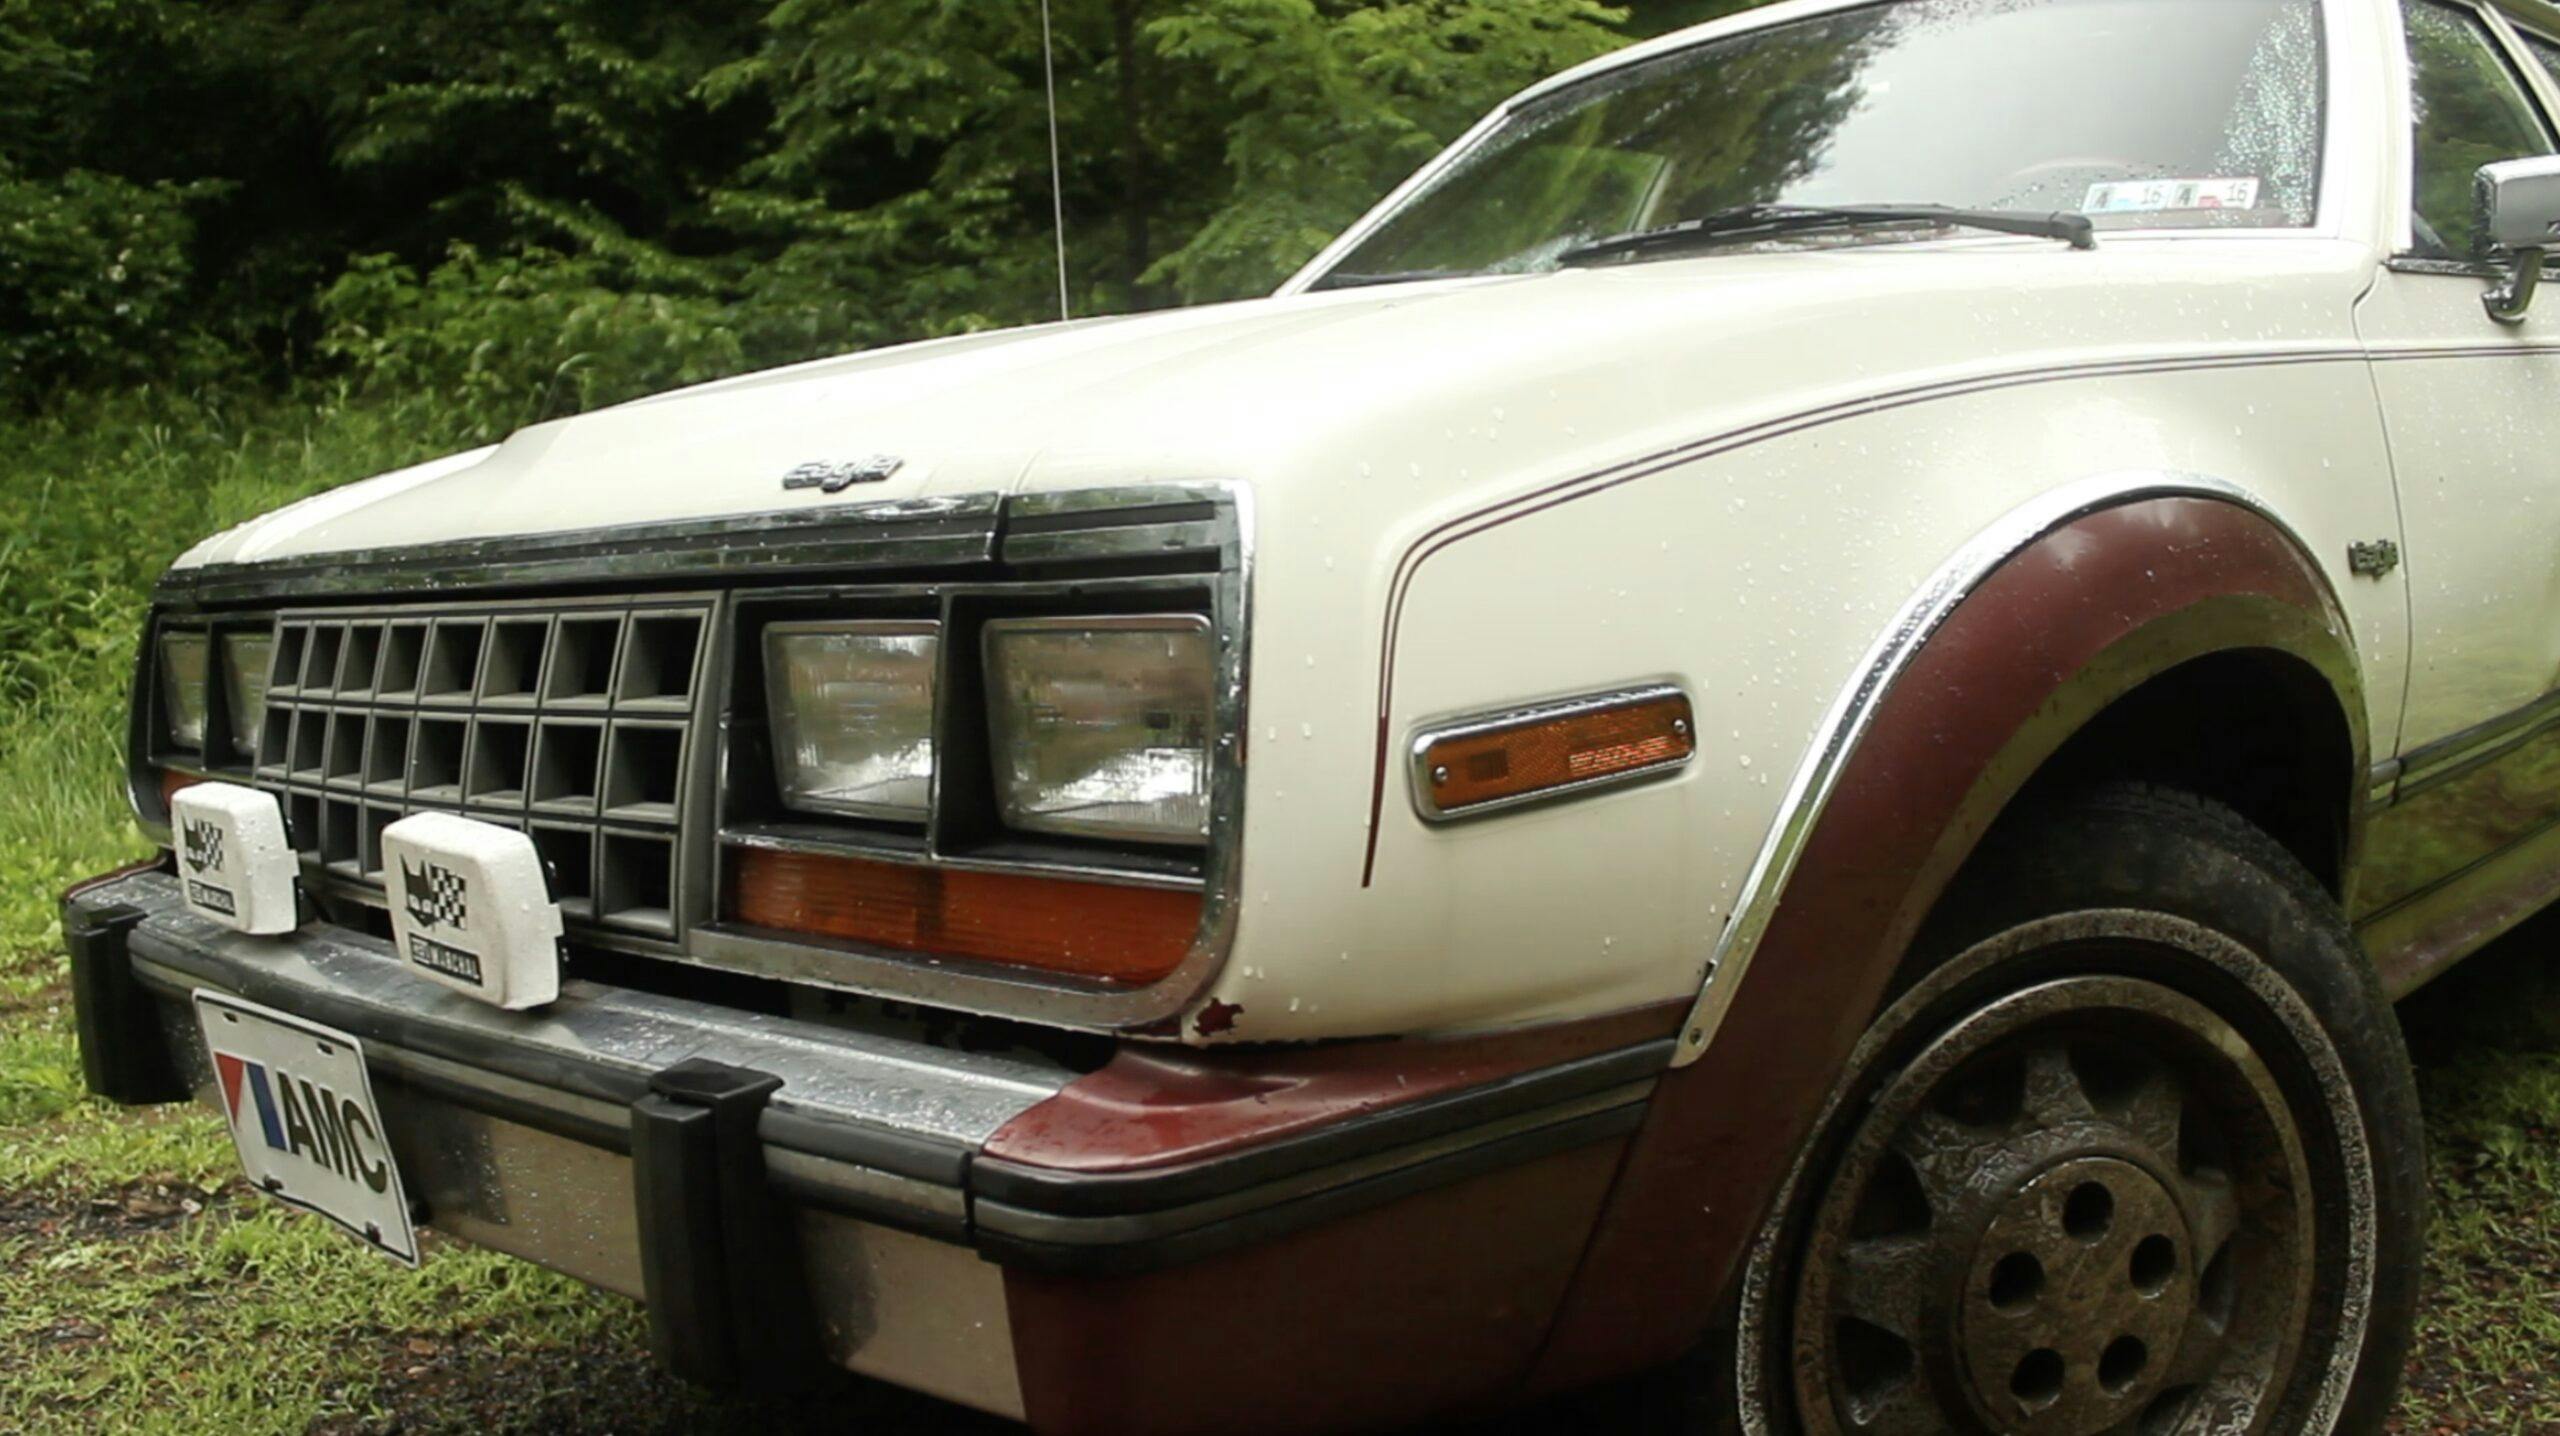 1986 AMC Eagle in the forest